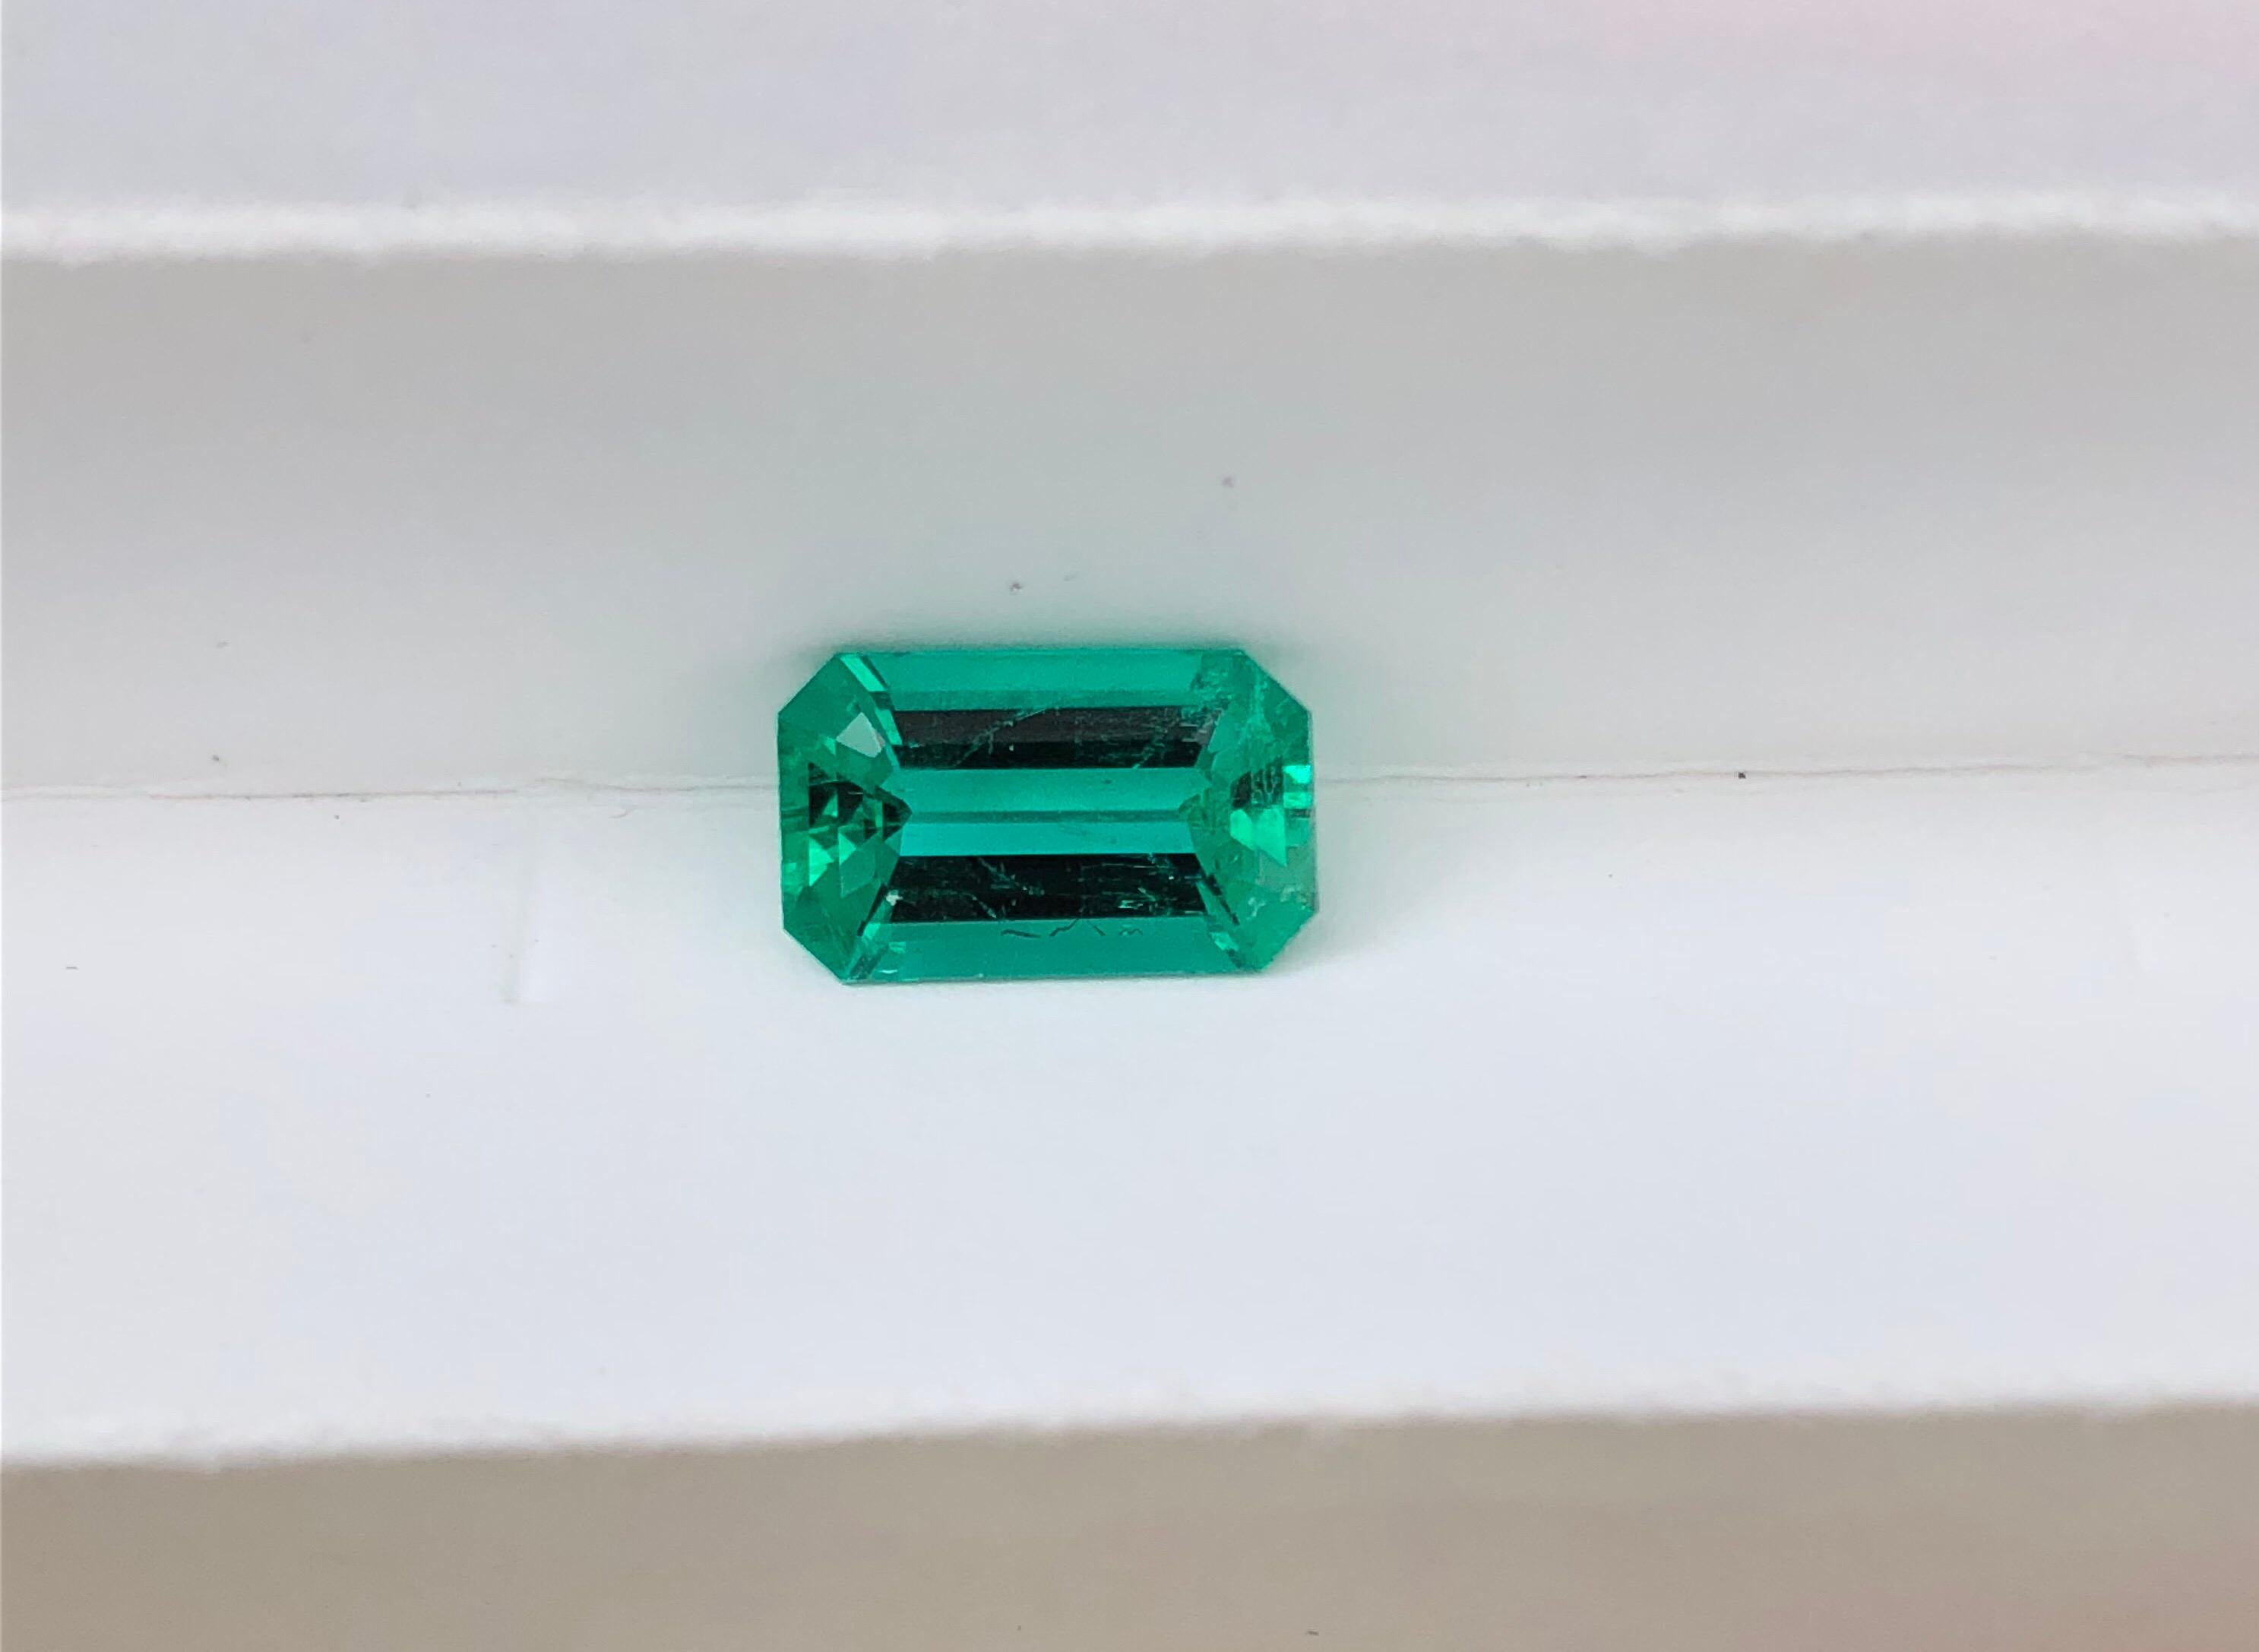 This immensely rare 2.17 carat, natural, no oil Colombian Emerald, emerald cut, is sought after by the world's most avid gem collectors globally, and is out of reach for the average consumer. Available exclusively at Merkaba Jewelry, this vibrant